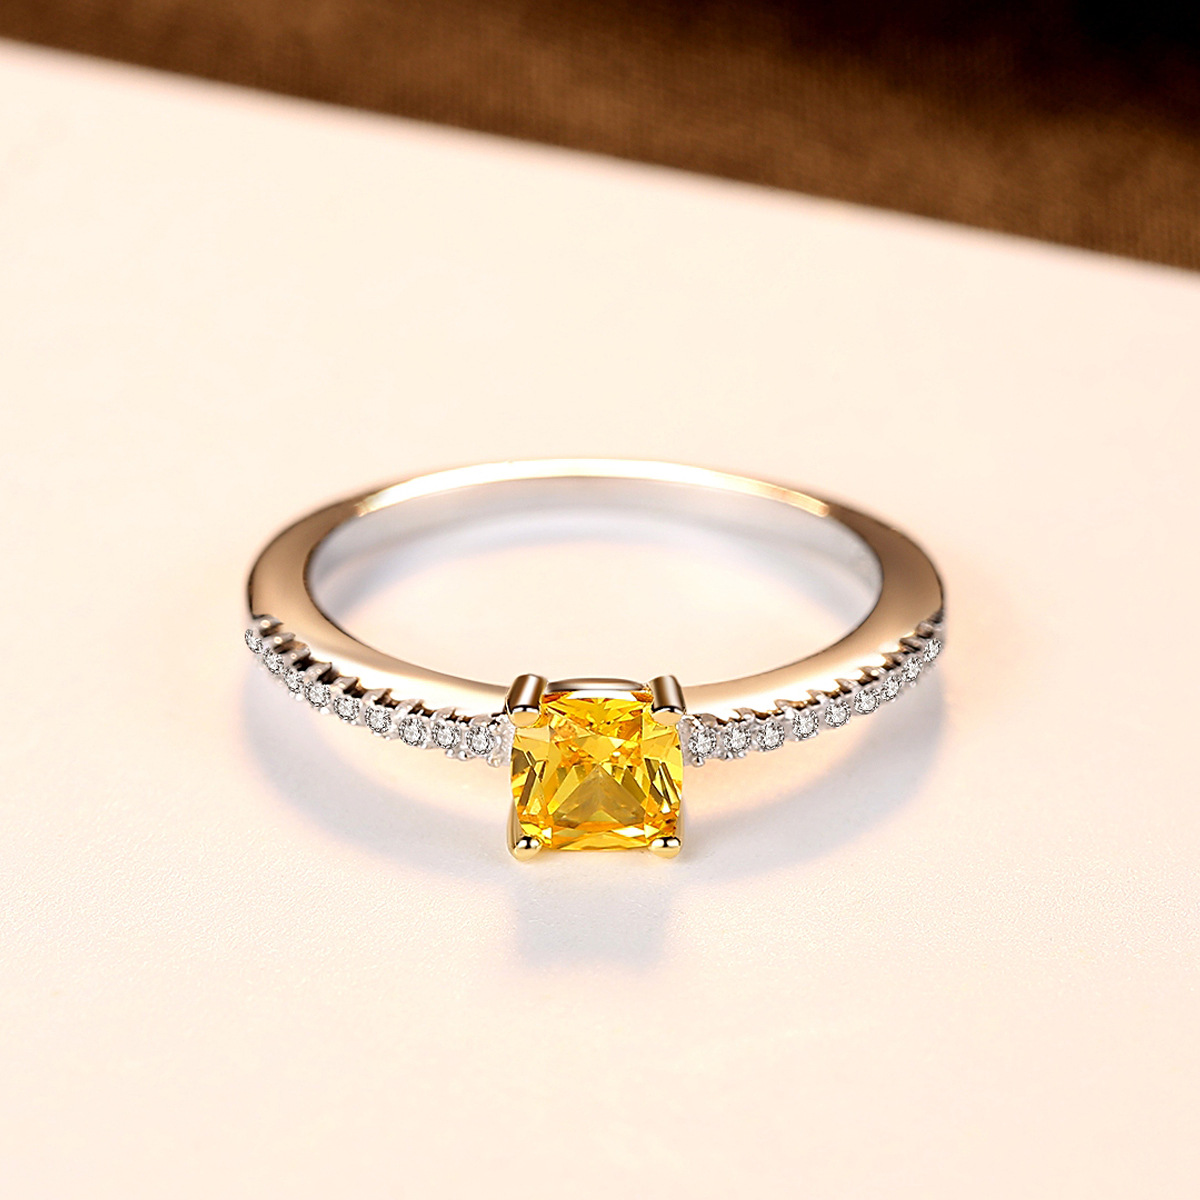 Yellow Topaz Sterling Silver Ring